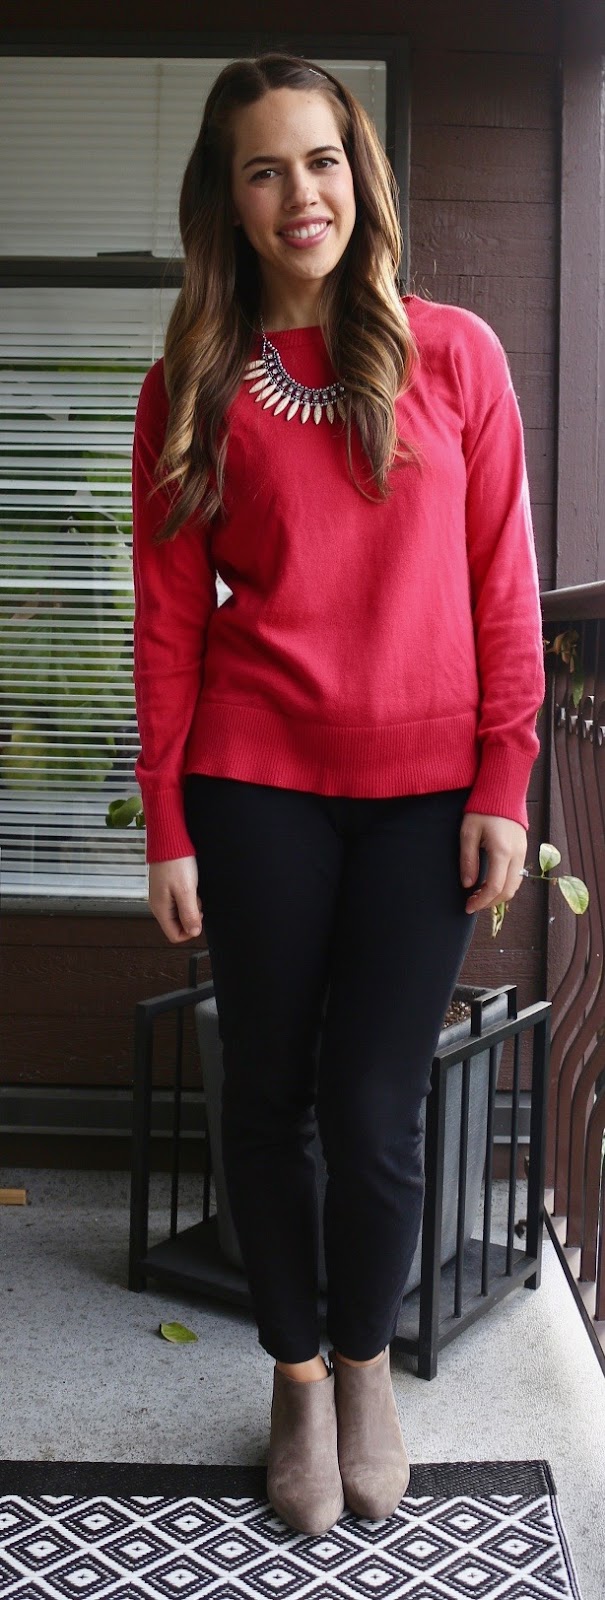 Jules in Flats - Red Gap Sweater, Old Navy Sueded Booties